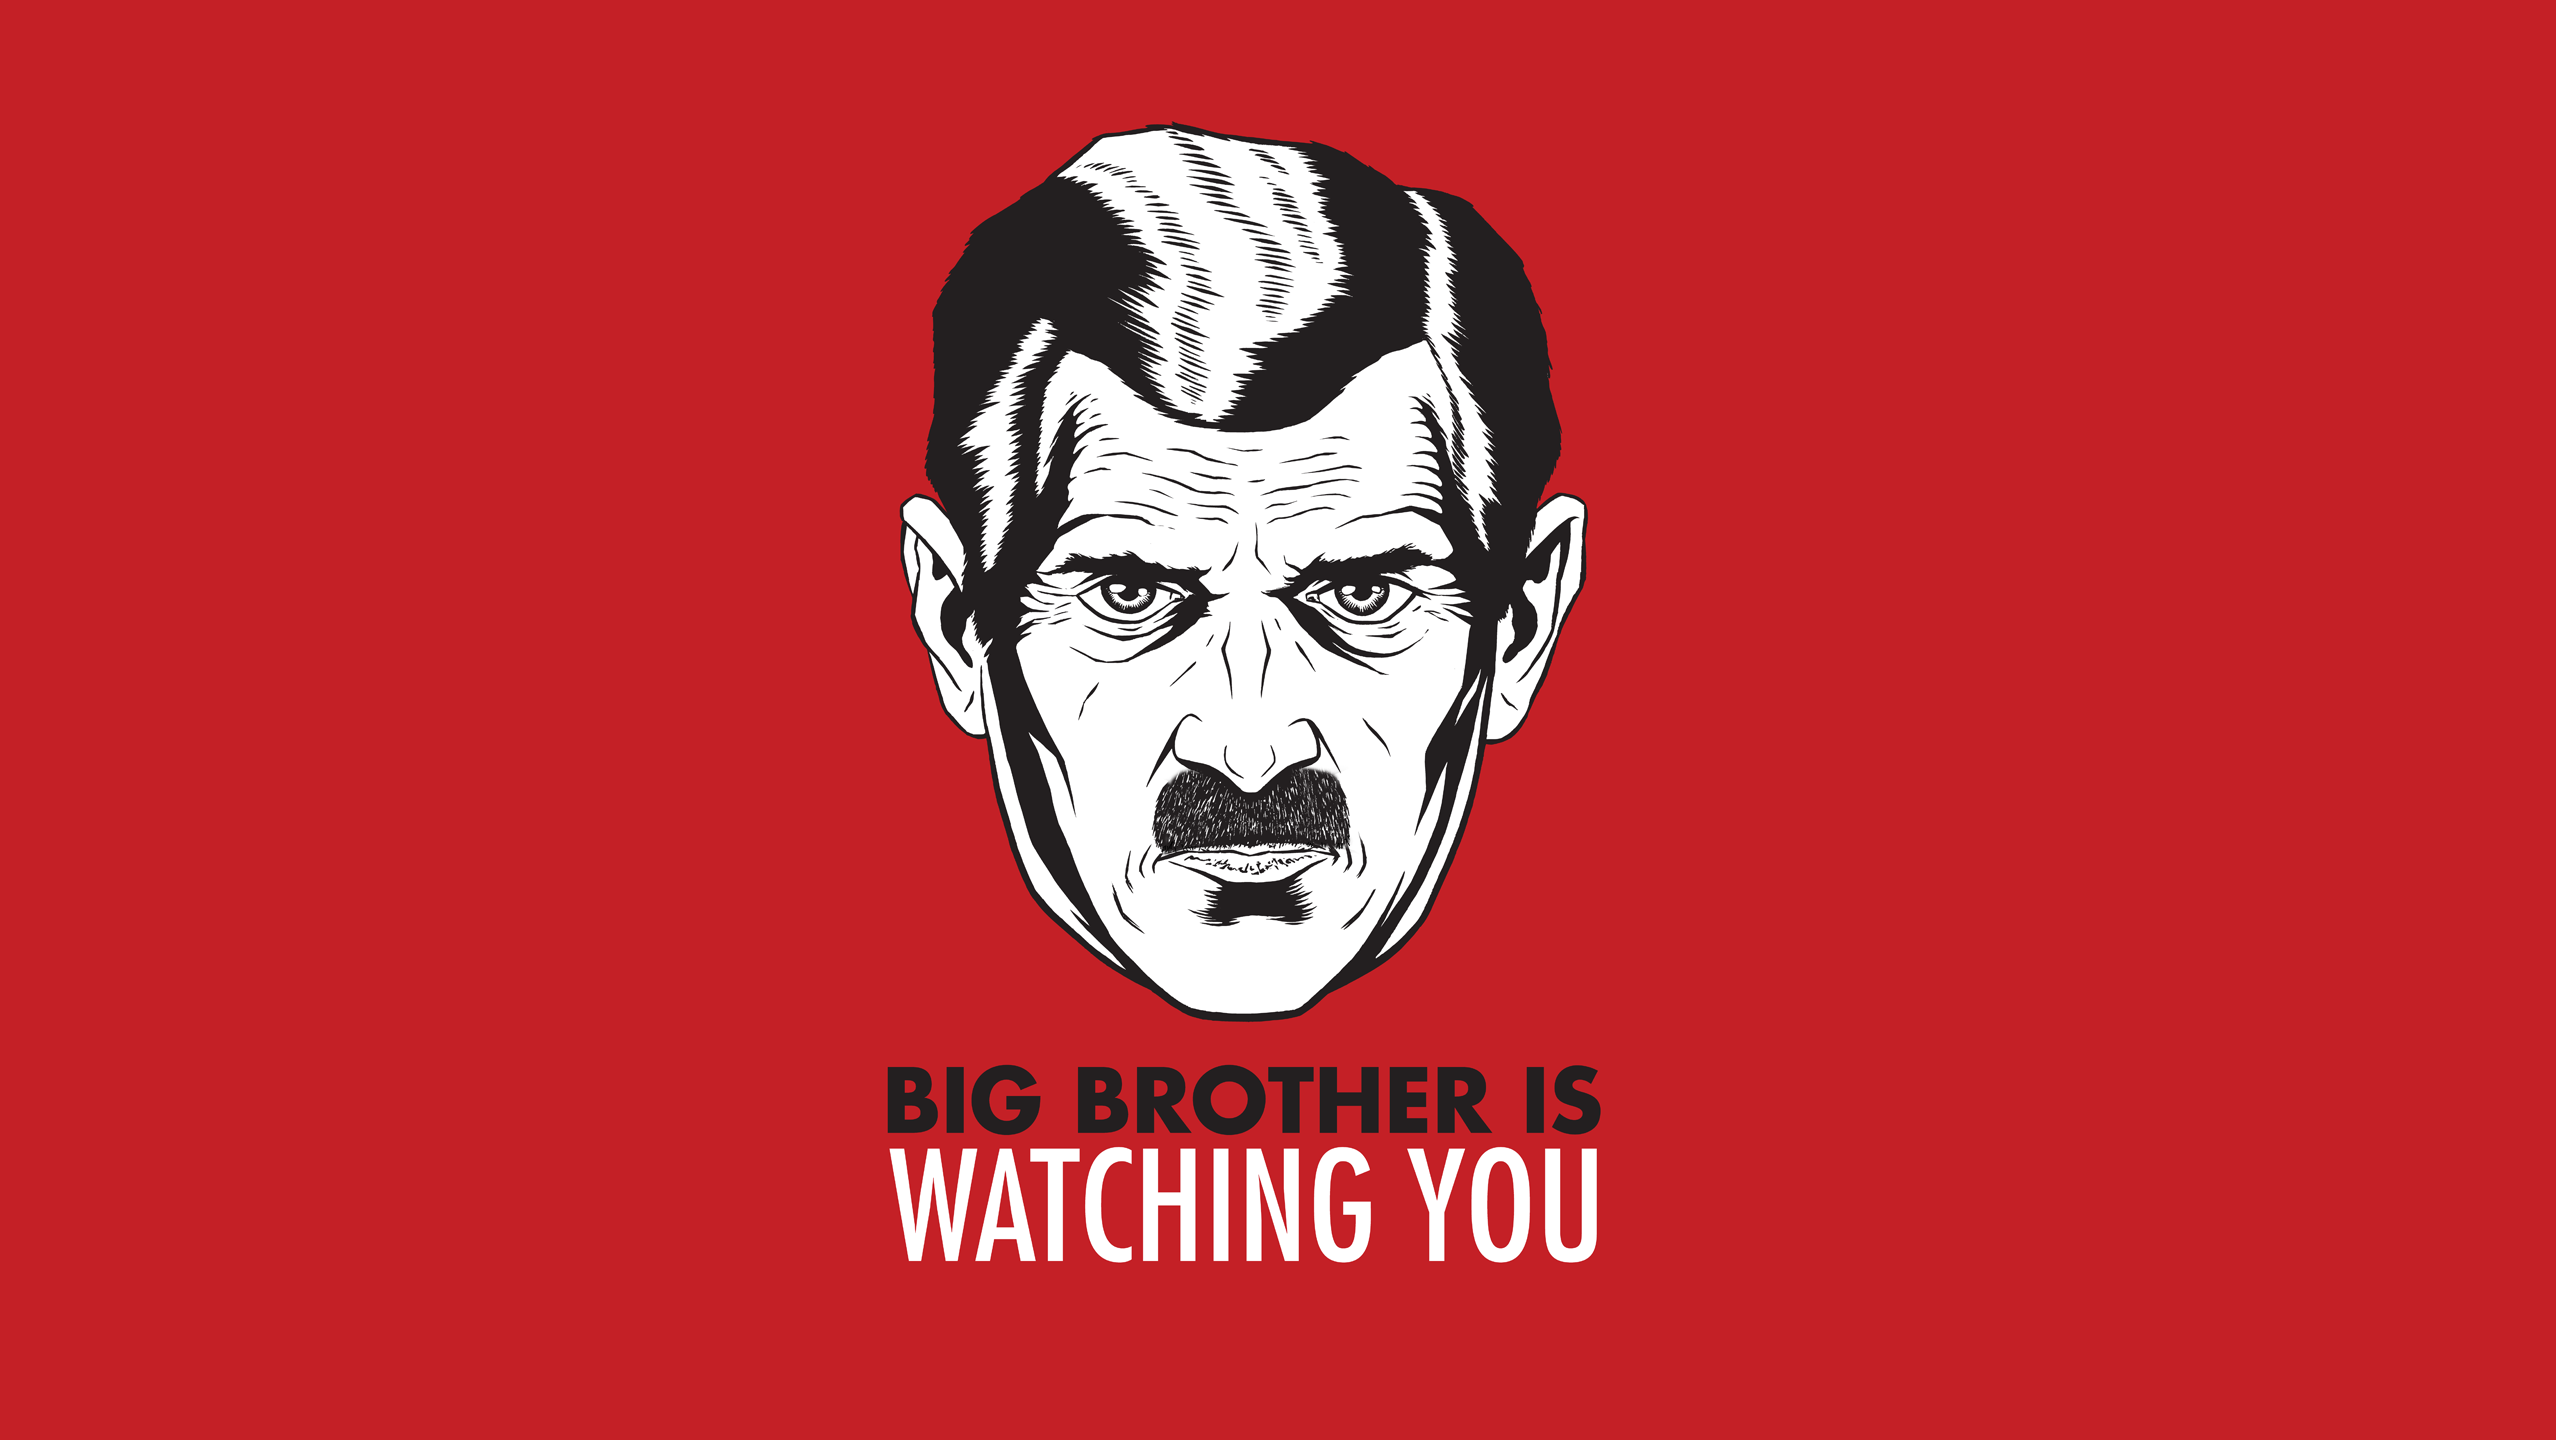 General 2556x1440 red background face big brother moustache red typography dystopian 1984 George Orwell